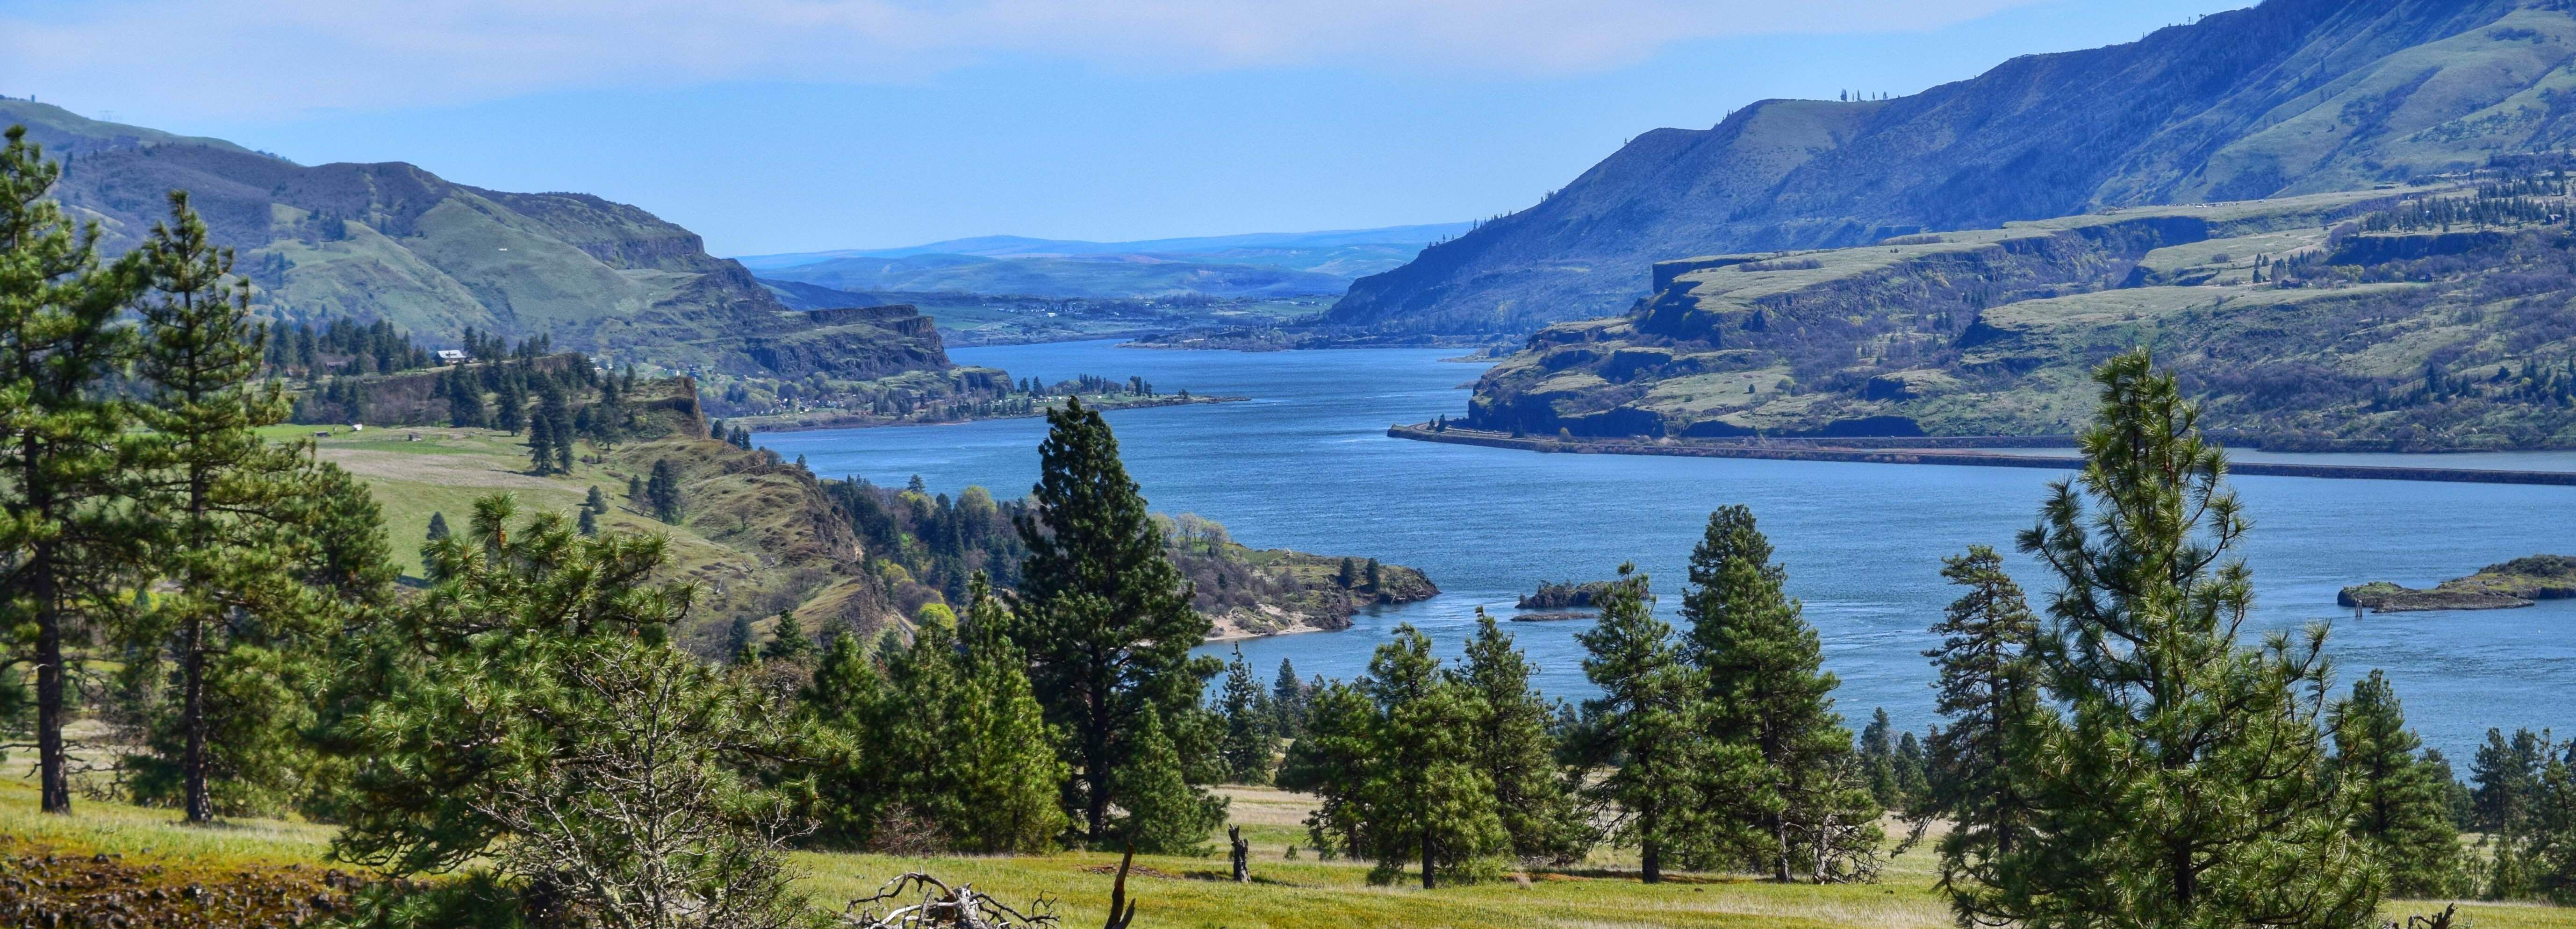 Sweeping Changes Approved to Columbia River Gorge Management